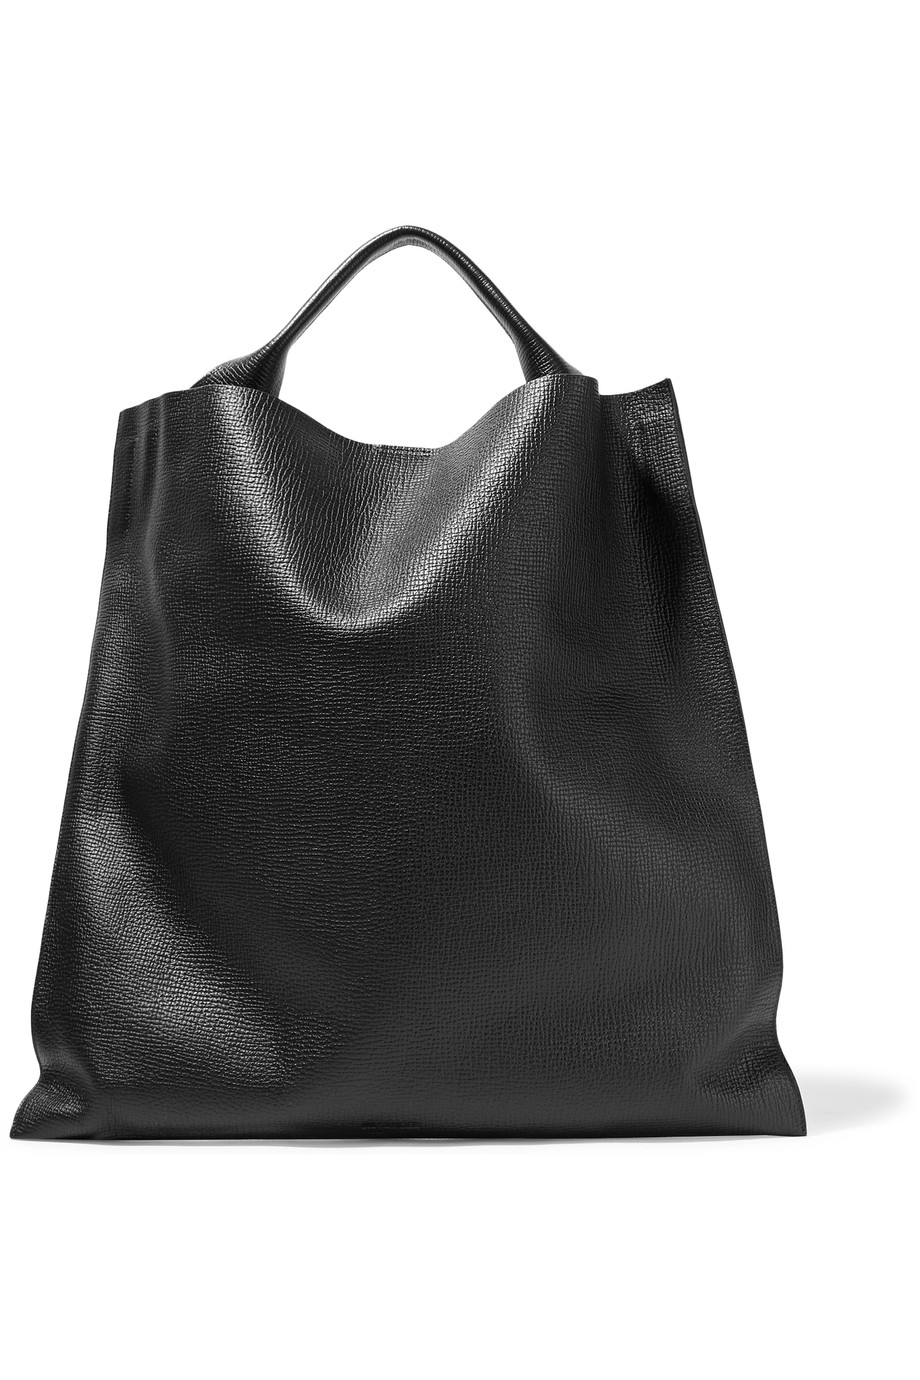 Jil Sander Textured-leather Tote | ModeSens